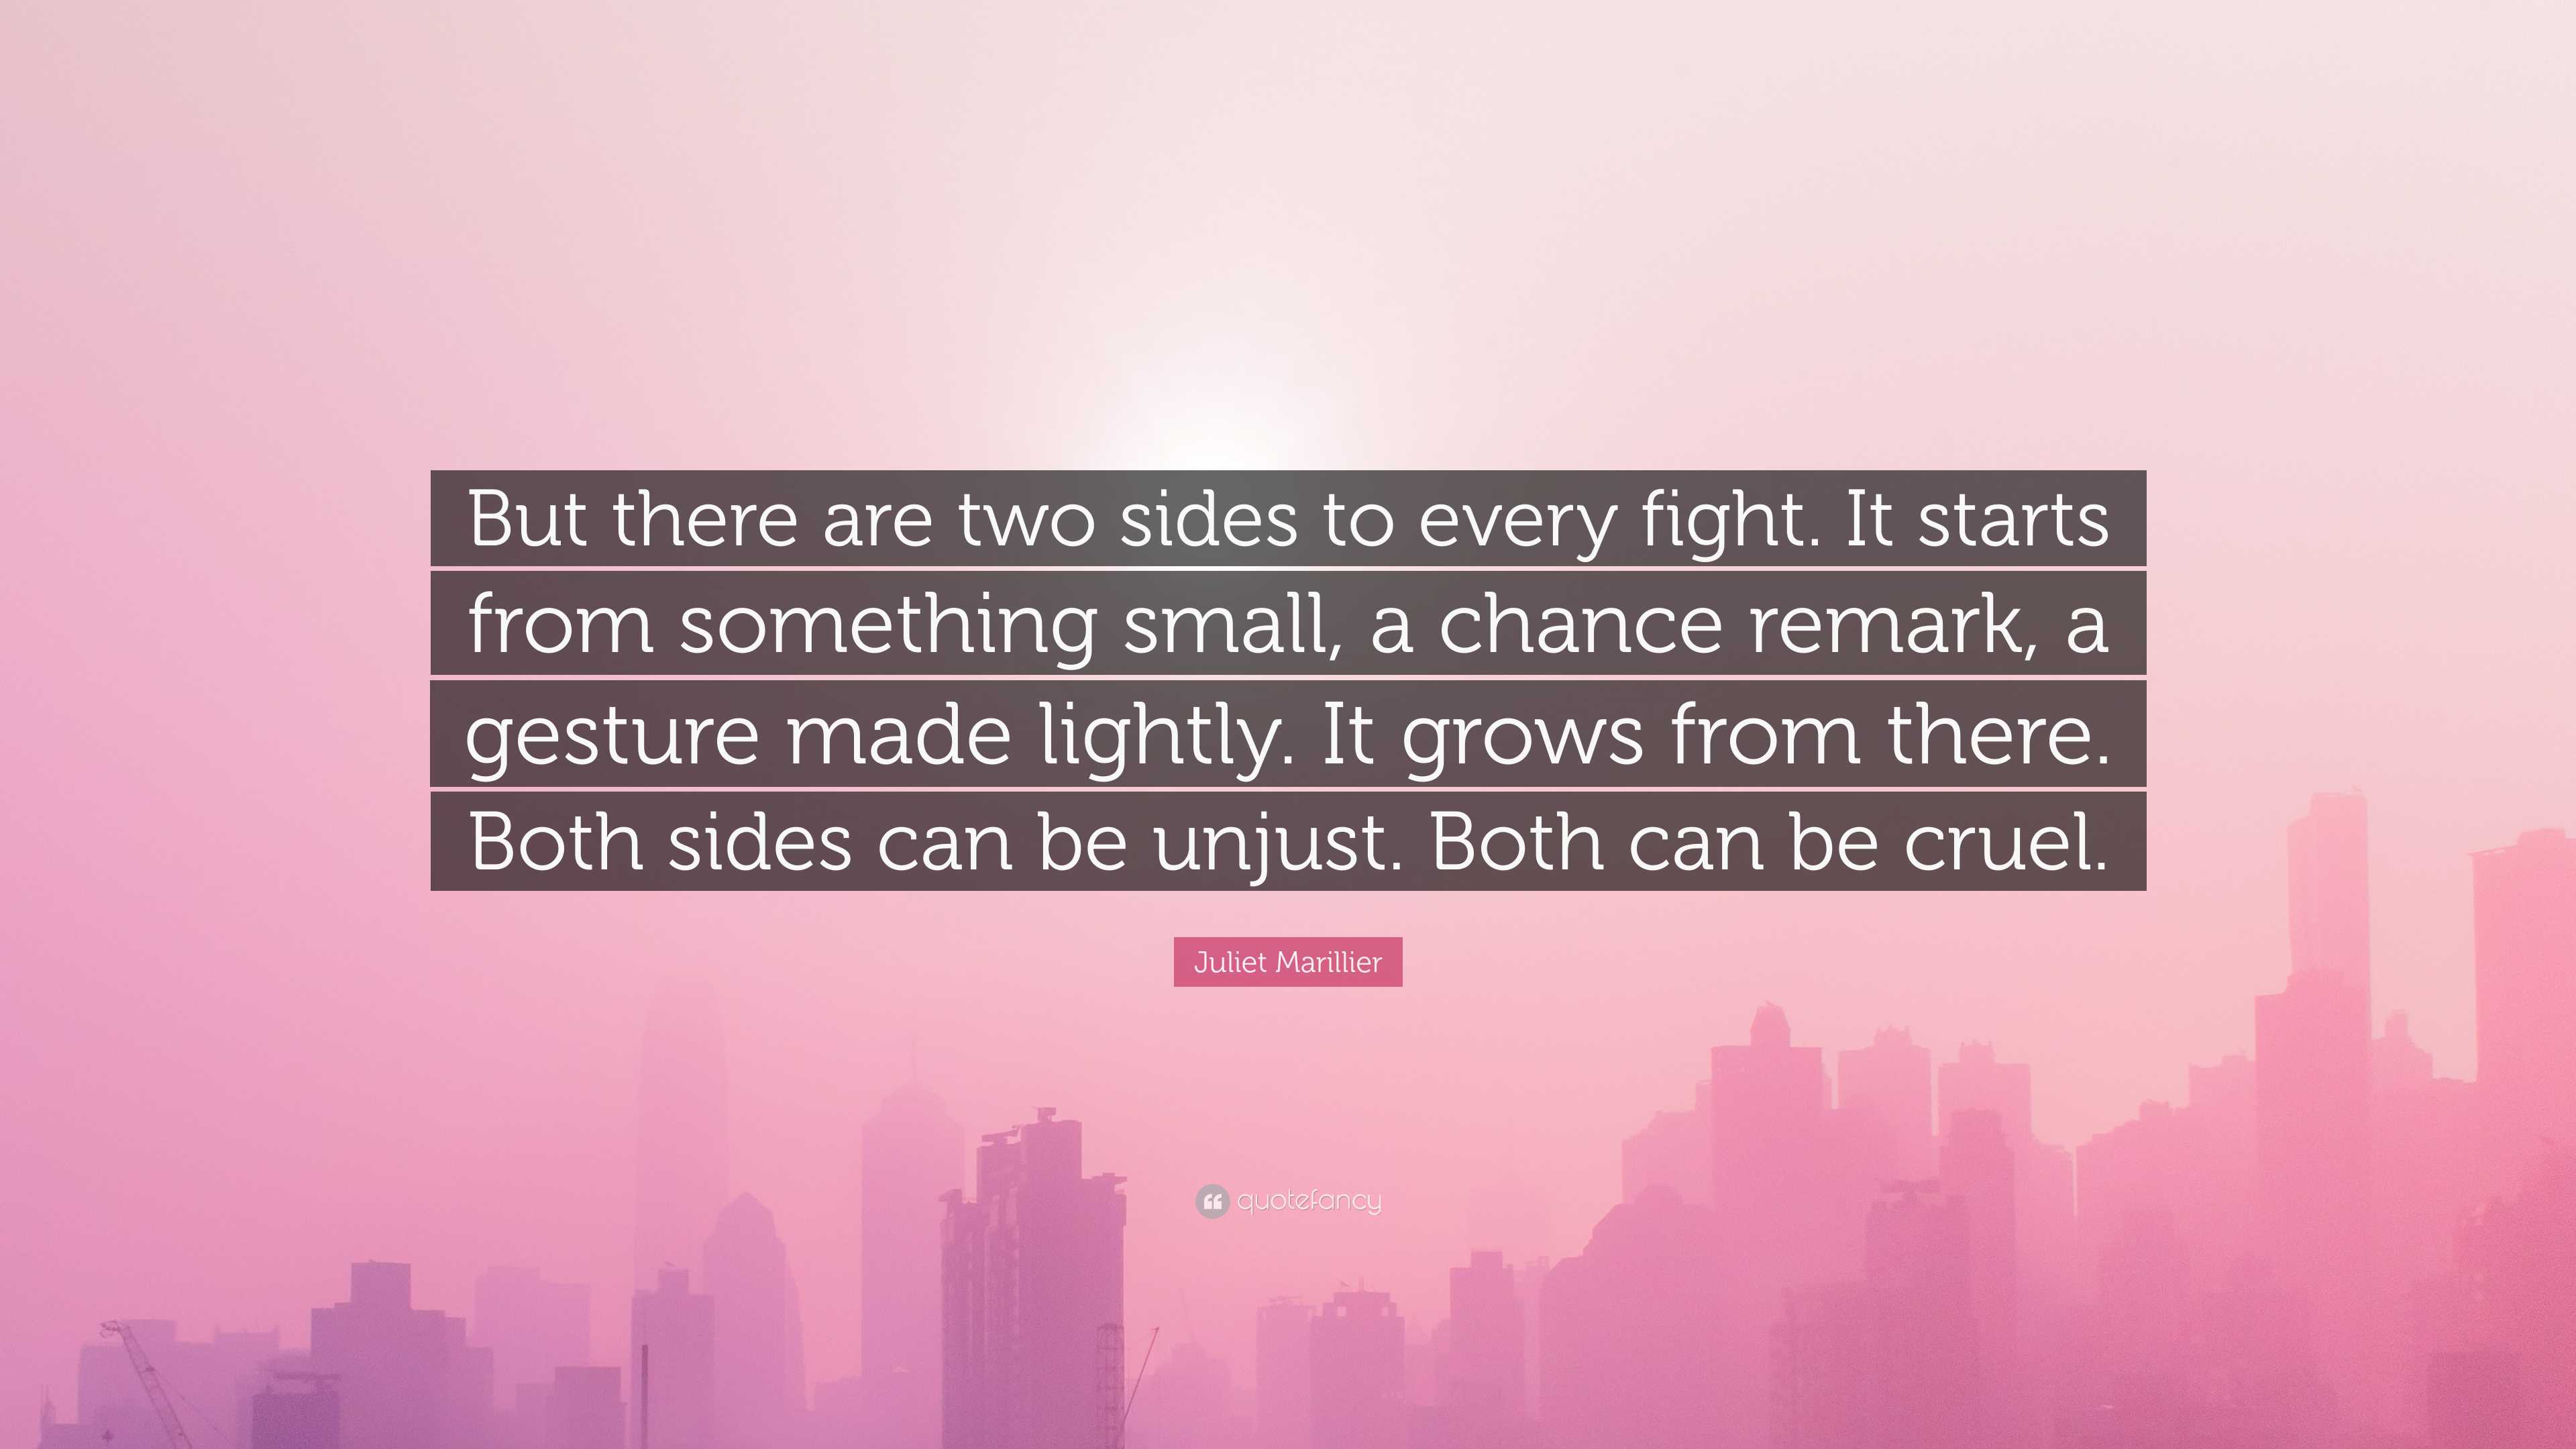 https://quotefancy.com/media/wallpaper/3840x2160/7890931-Juliet-Marillier-Quote-But-there-are-two-sides-to-every-fight-It.jpg